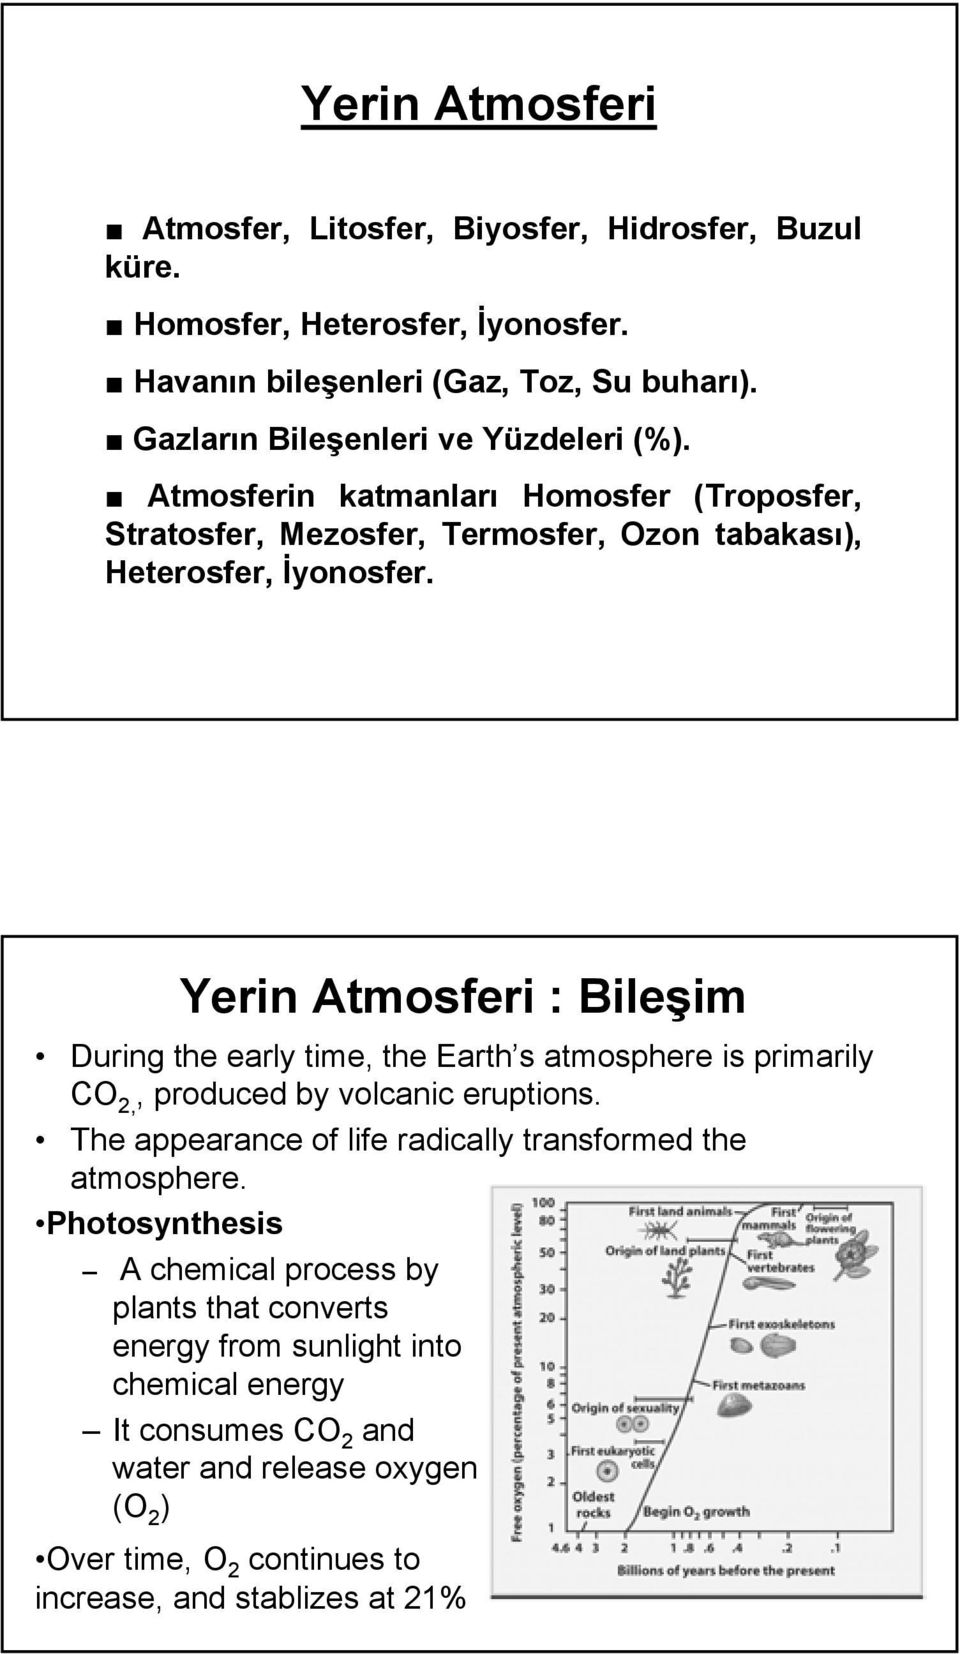 Yerin Atmosferi : Bileşim During the early time, the Earth s atmosphere is primarily CO 2,, produced by volcanic eruptions.